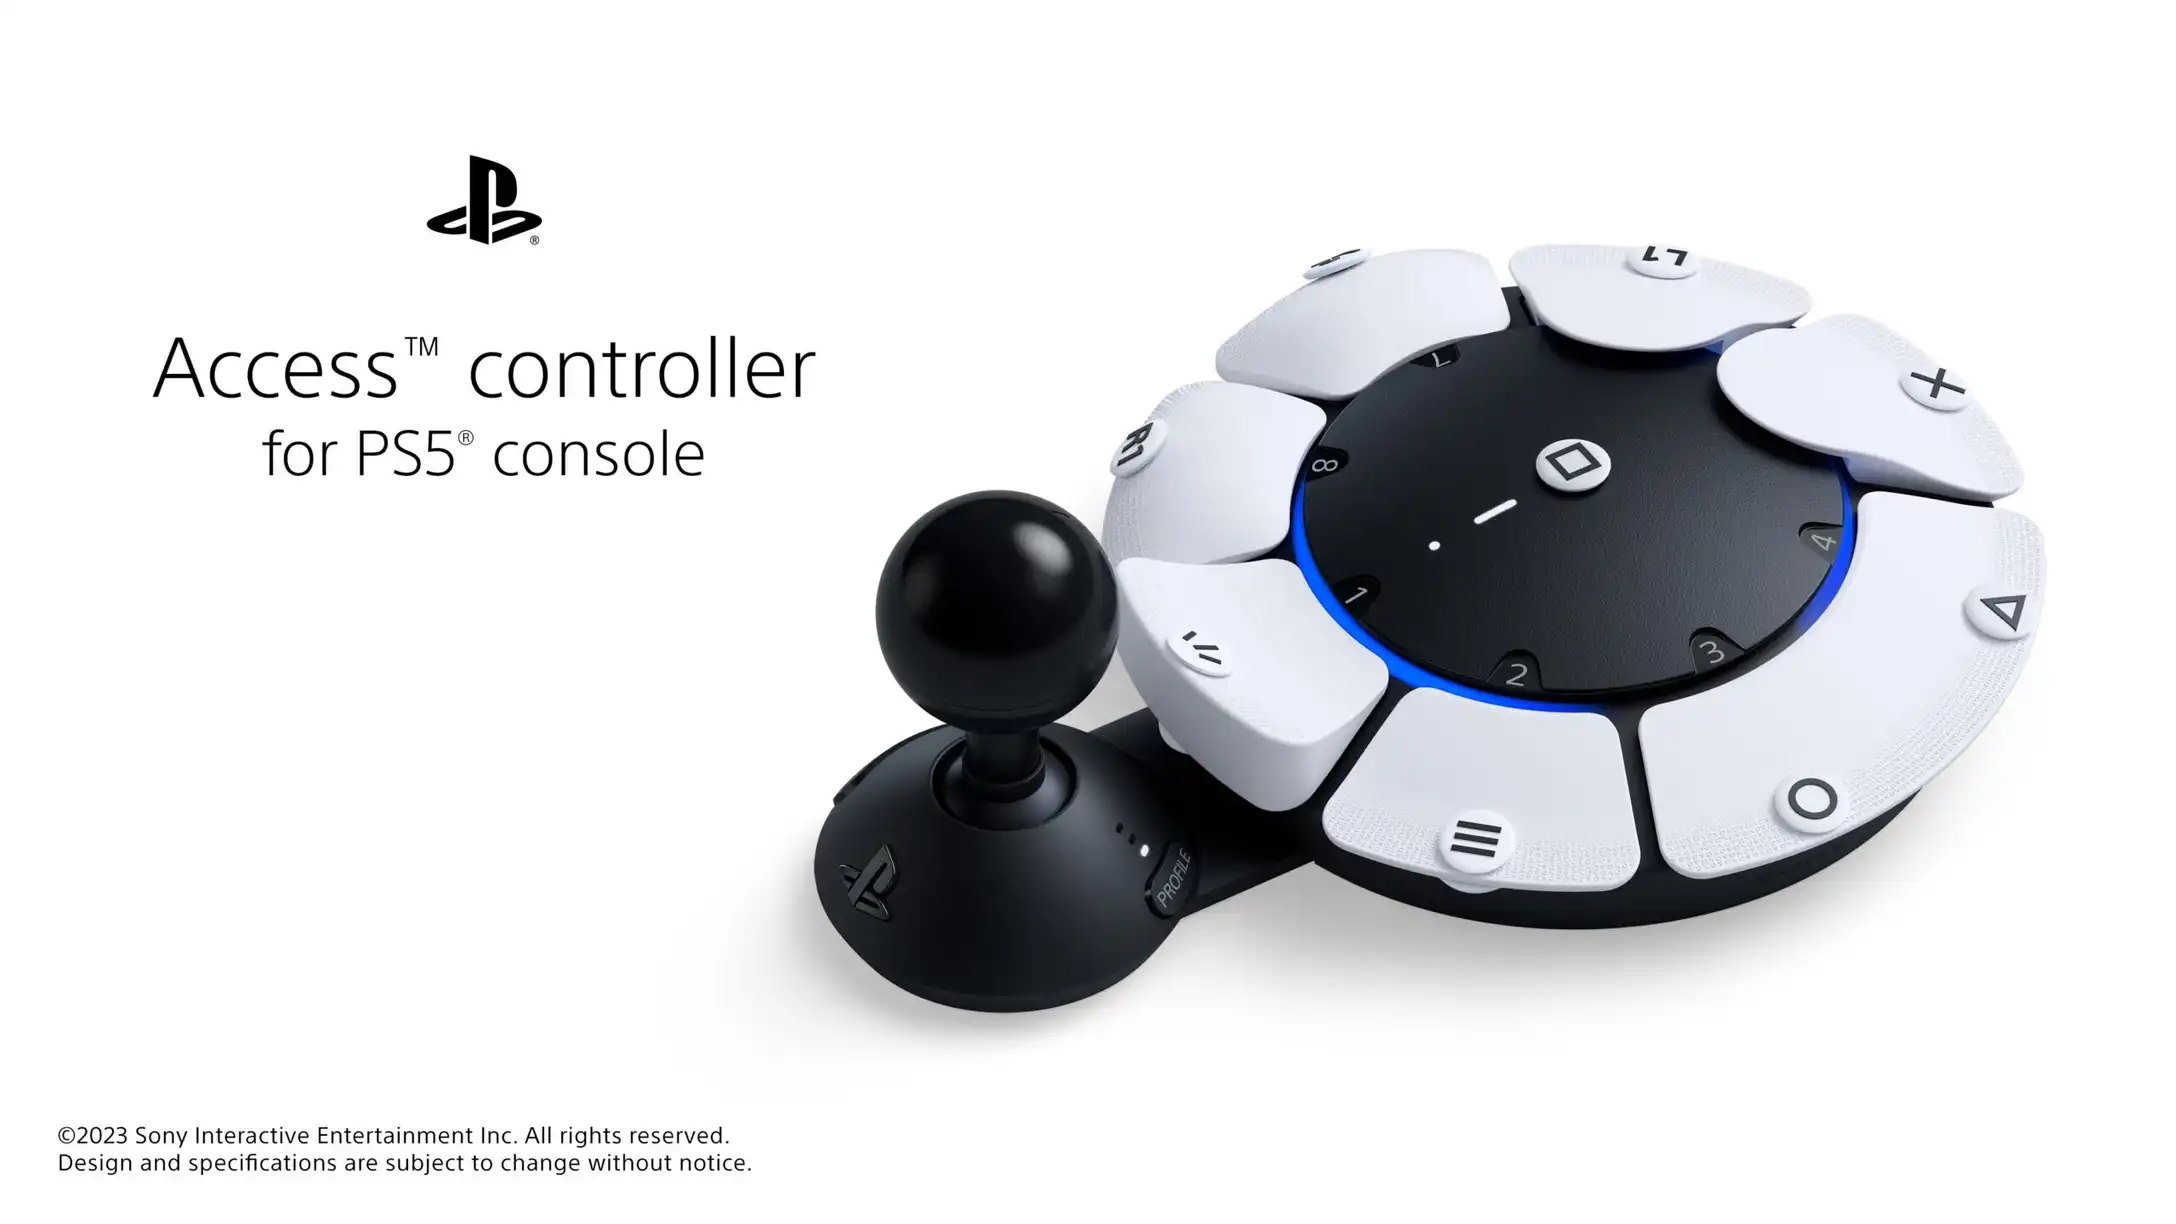 PlayStation Access controller kit for accessibility